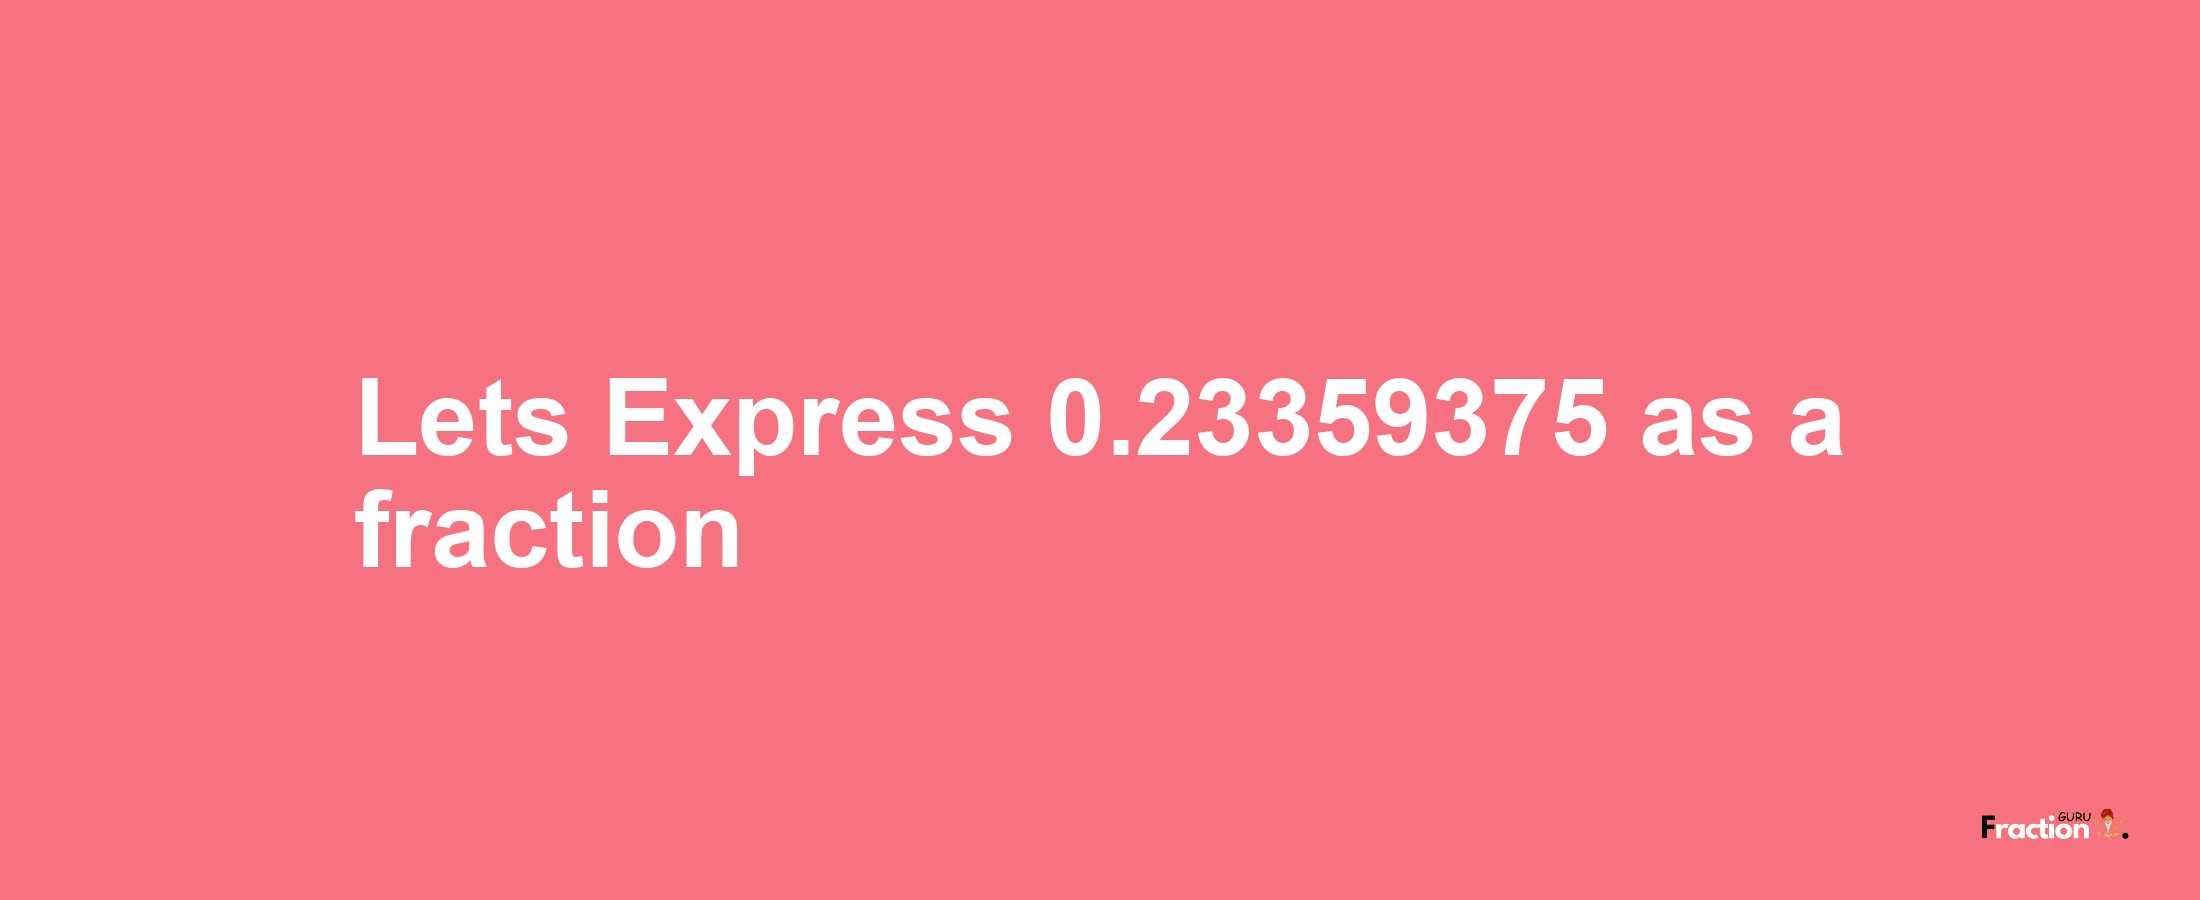 Lets Express 0.23359375 as afraction